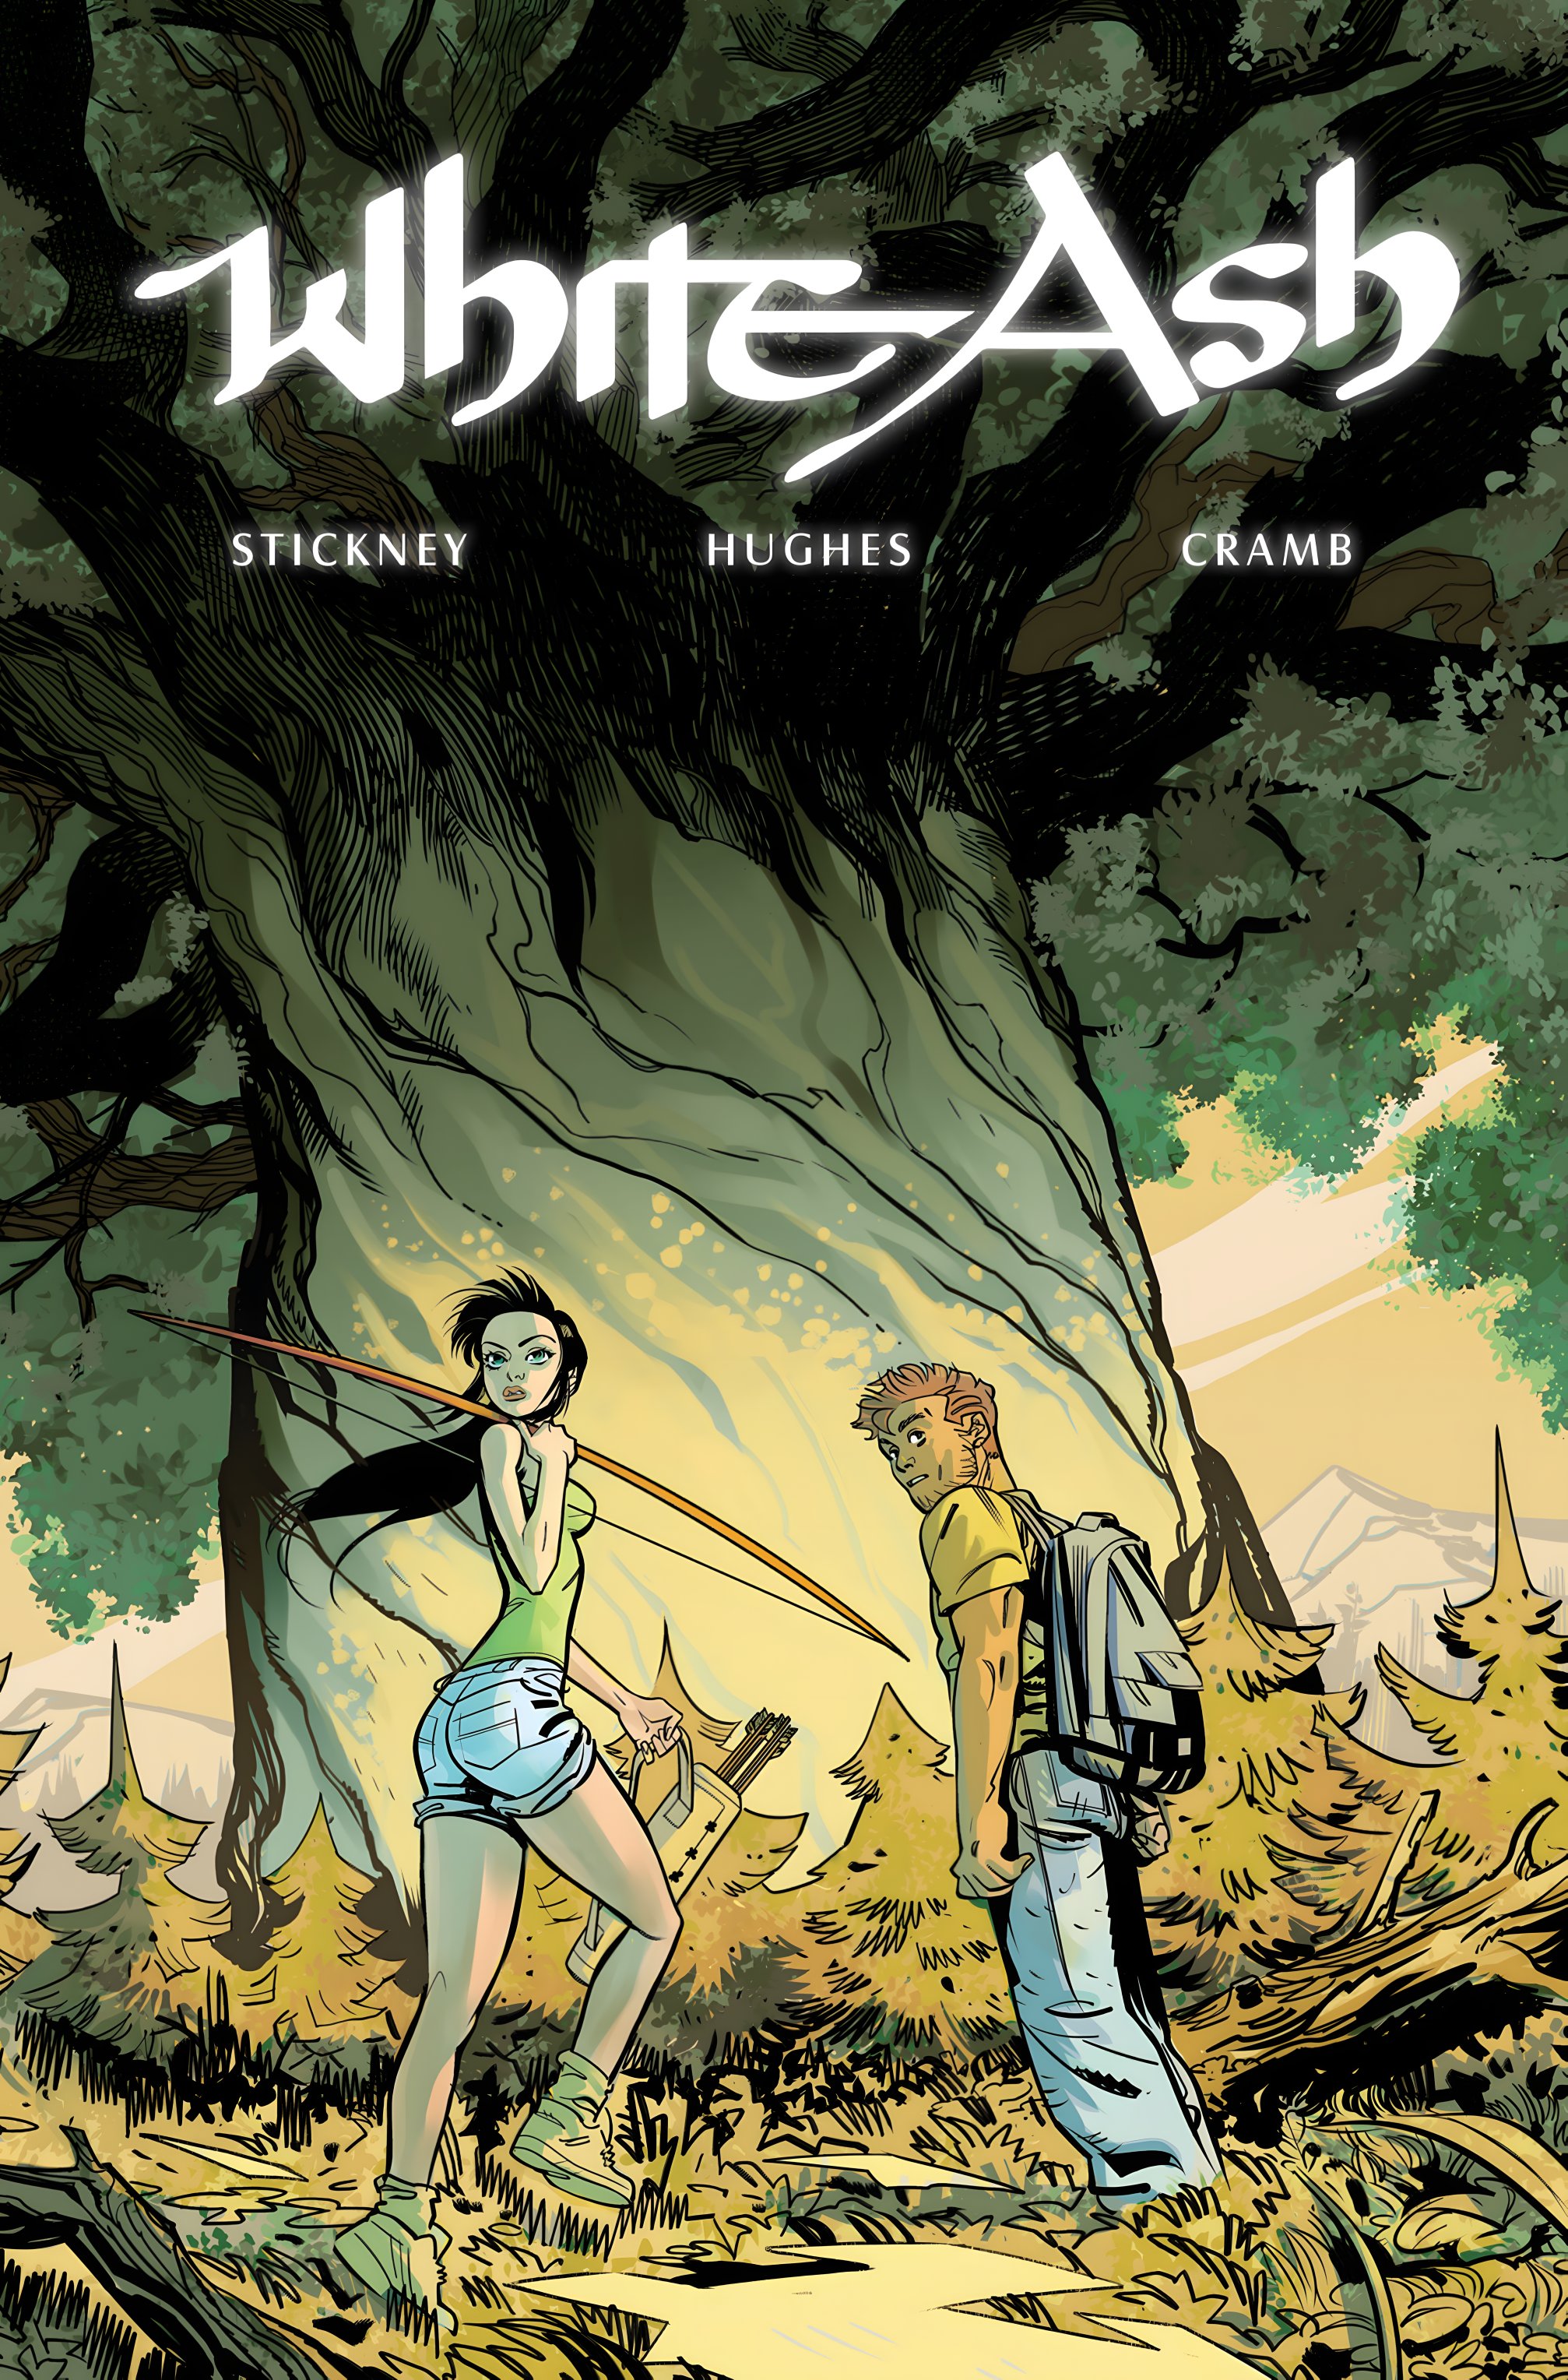 Read online White Ash comic -  Issue # TPB (Part 1) - 1